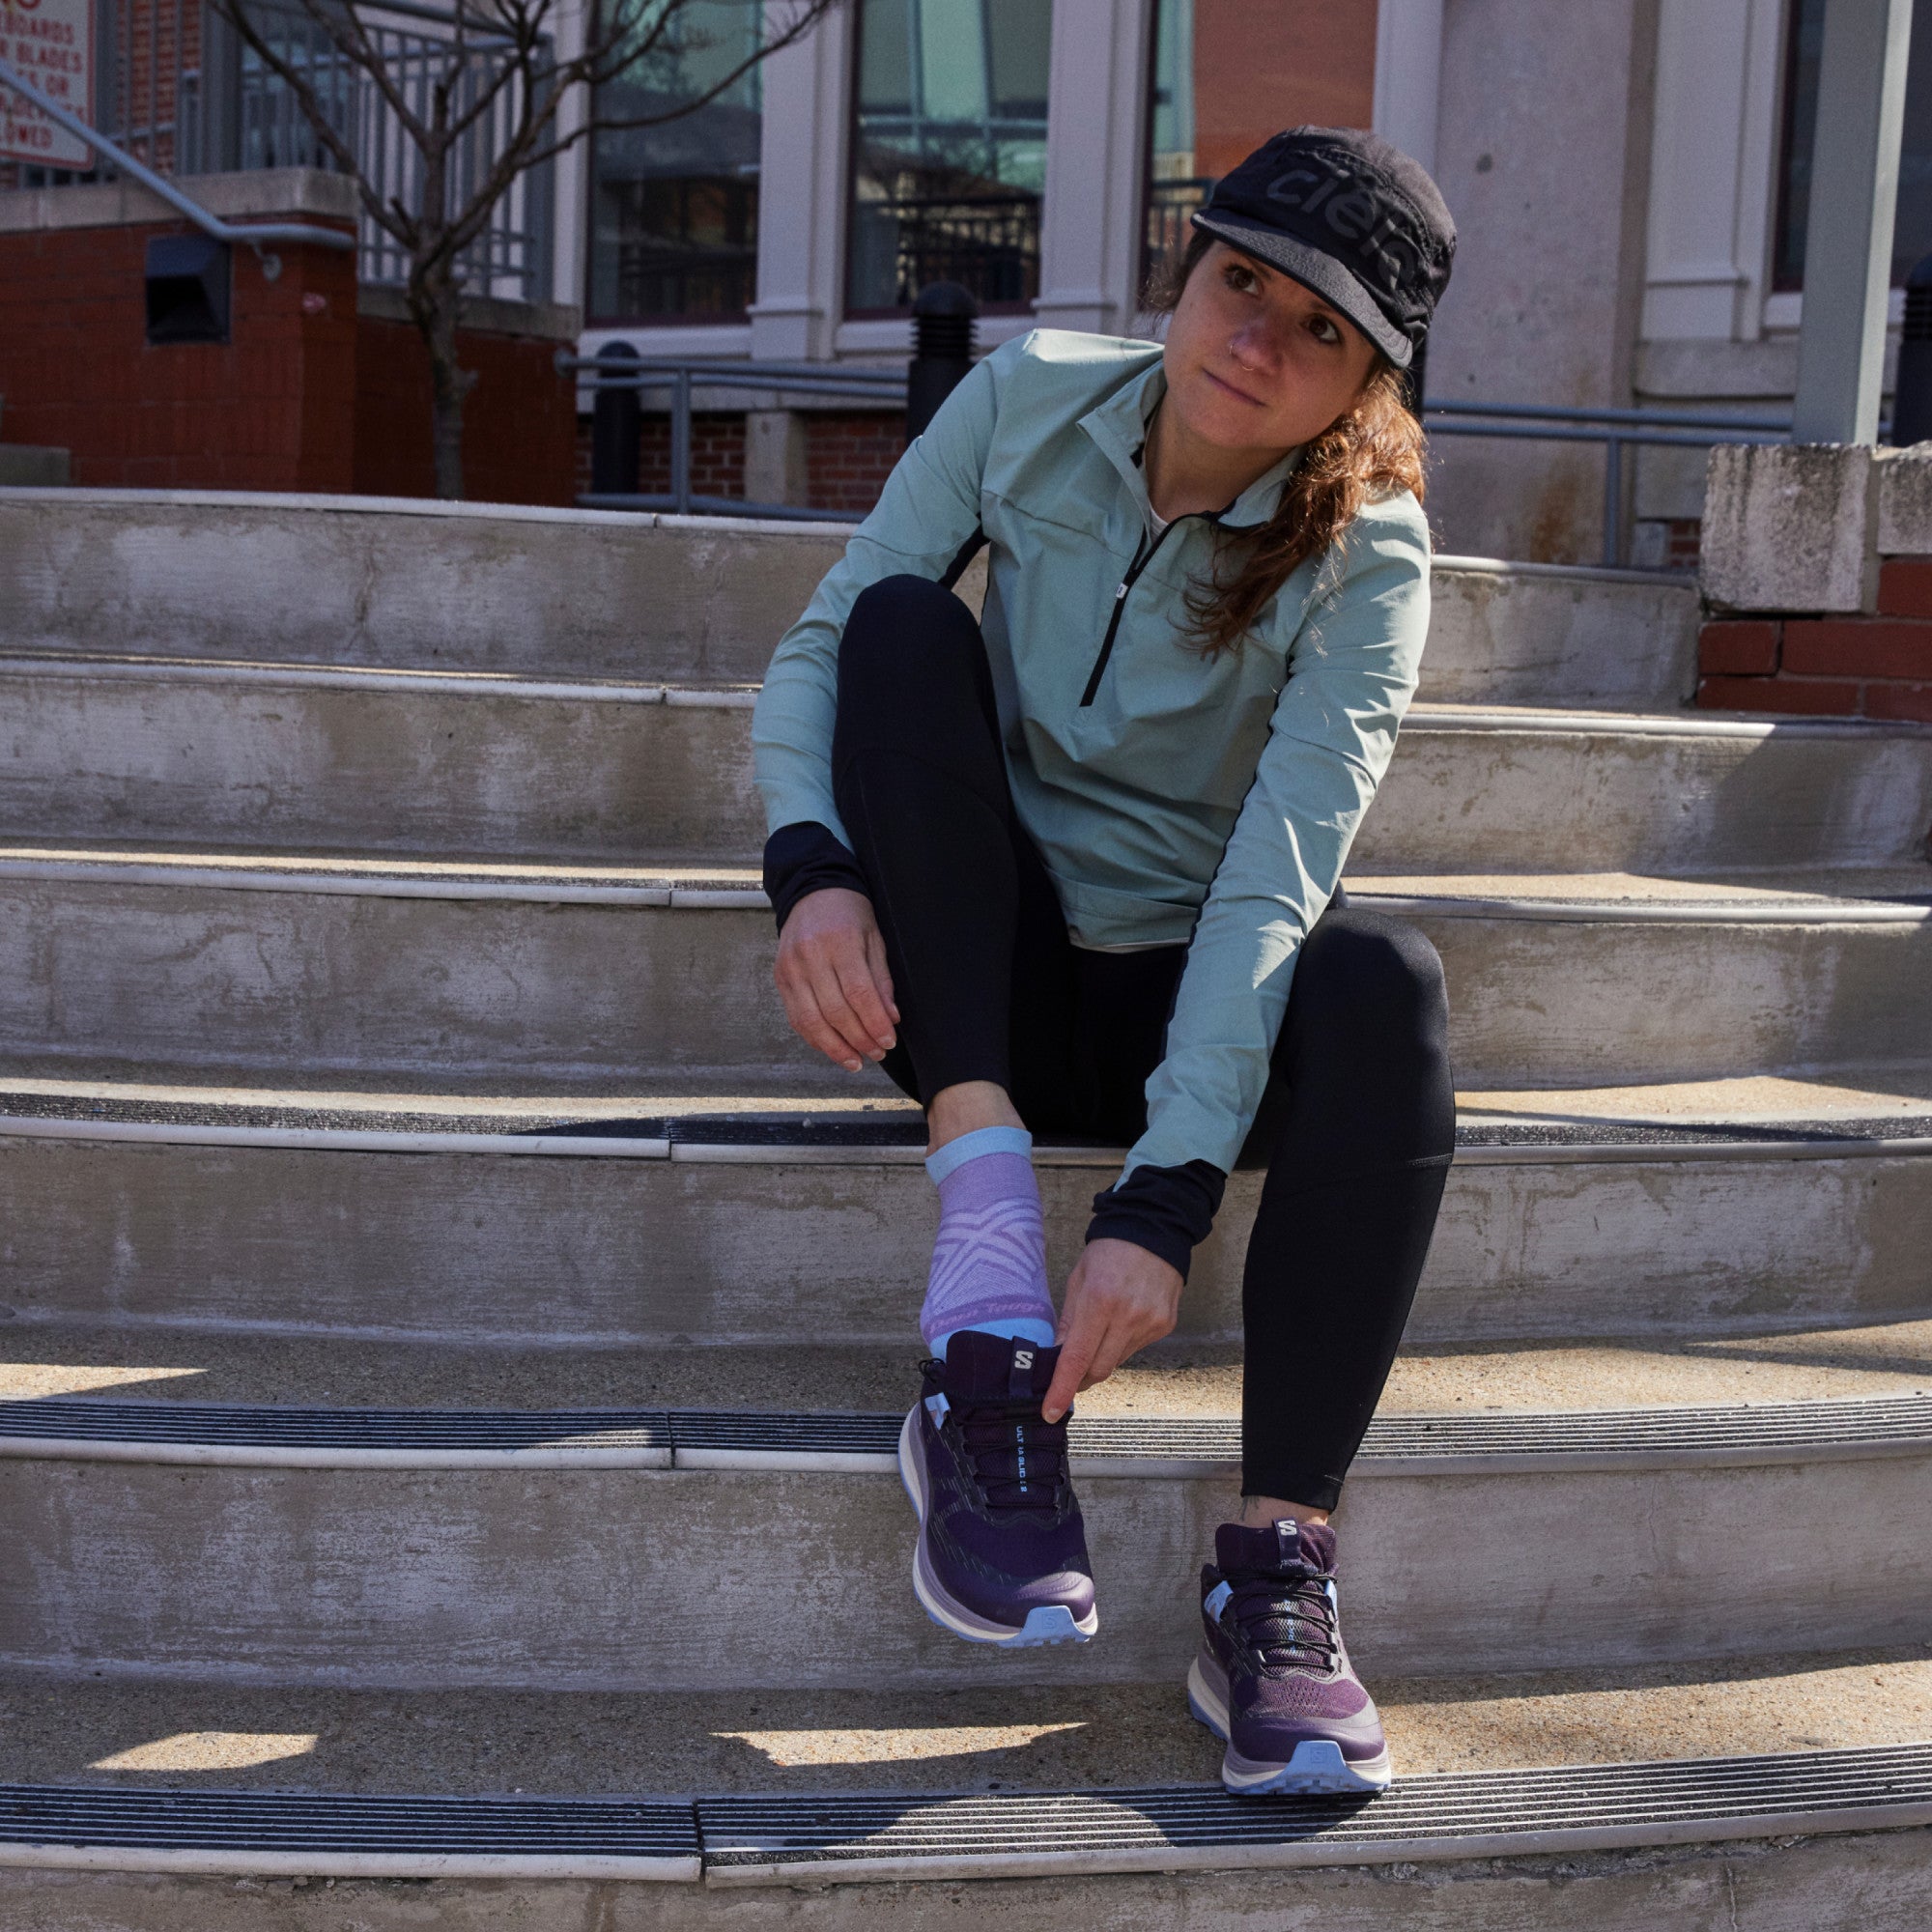 Model sitting on concrete steps while wearing 1043 socks in lavender colorway and slipping on purple running shoe on right foot